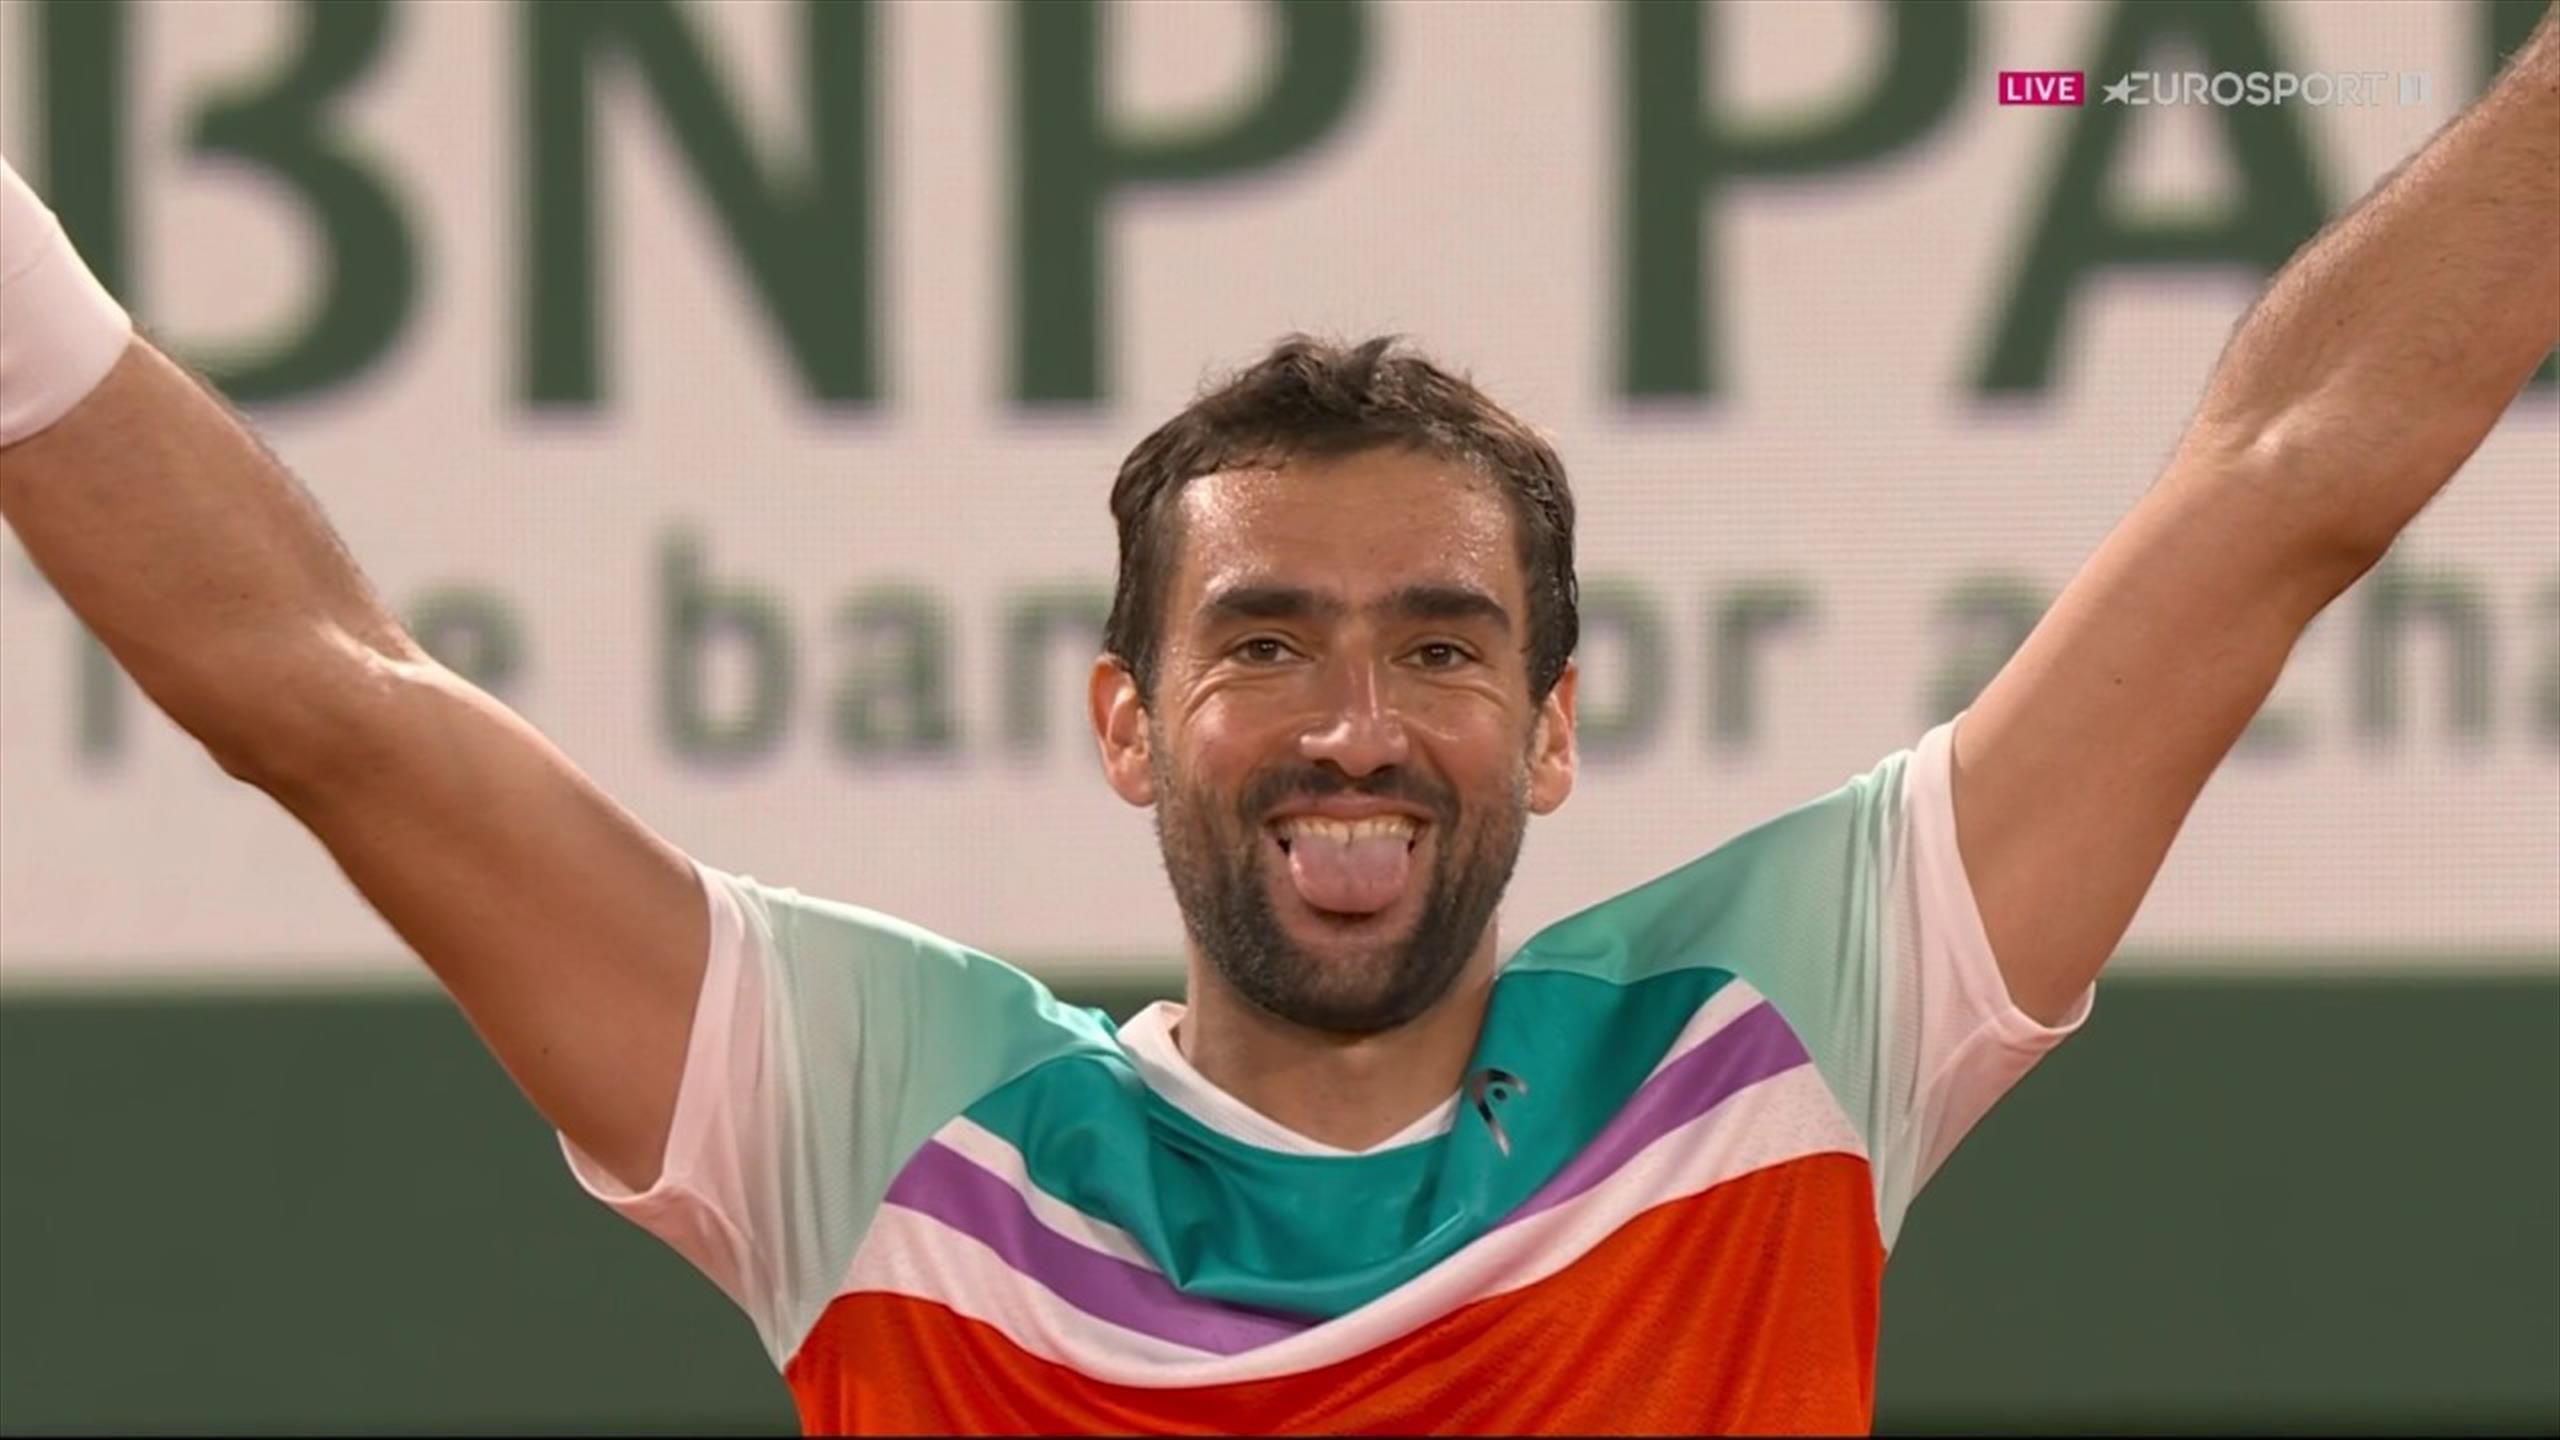 French Open 2022 What a performance! - Marin Cilic seals incredible win over Daniil Medvedev - Tennis video